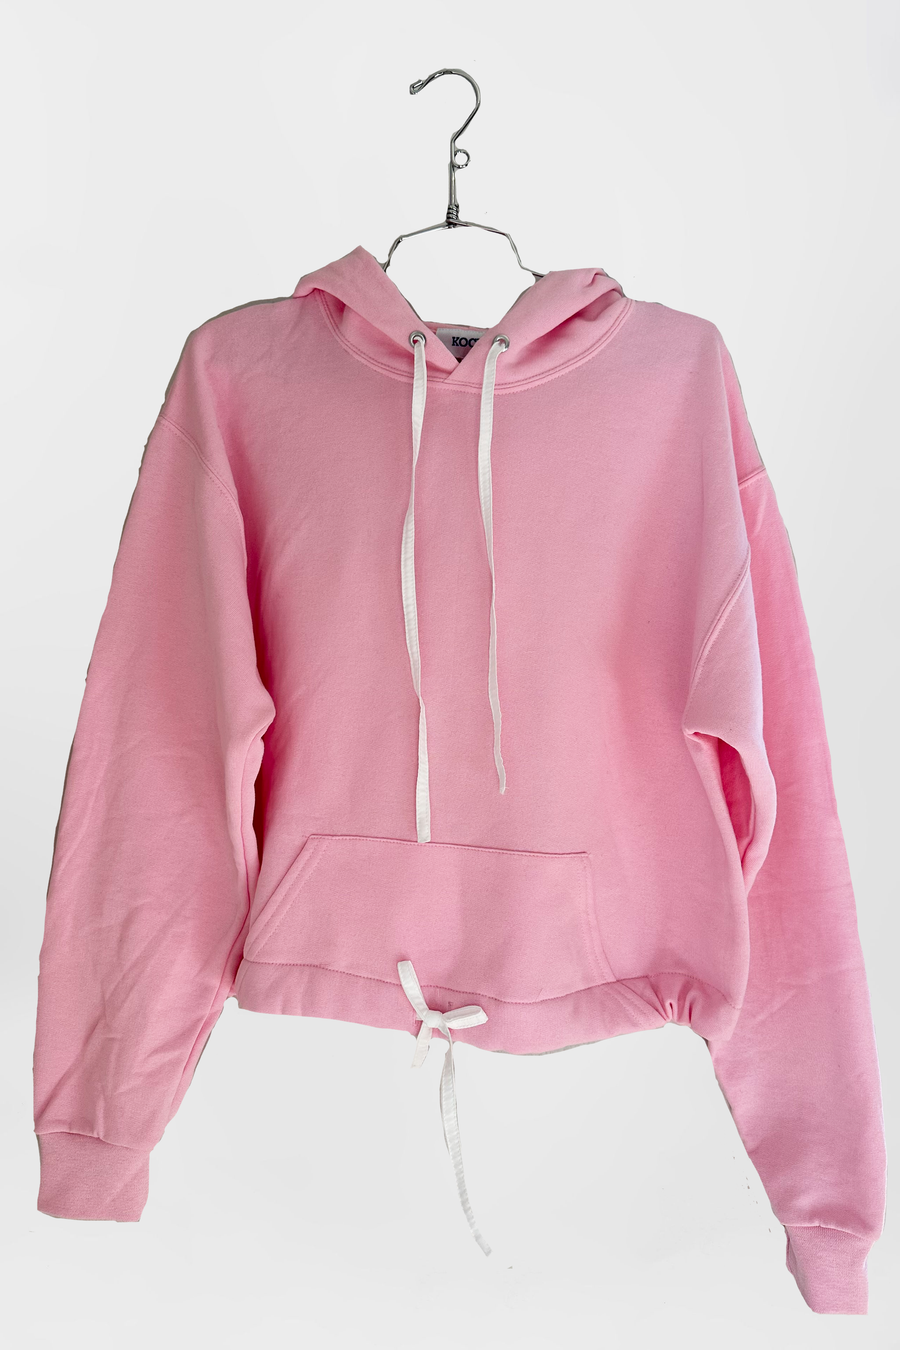 Cropped Hoodie Pink *Limited*Edition*